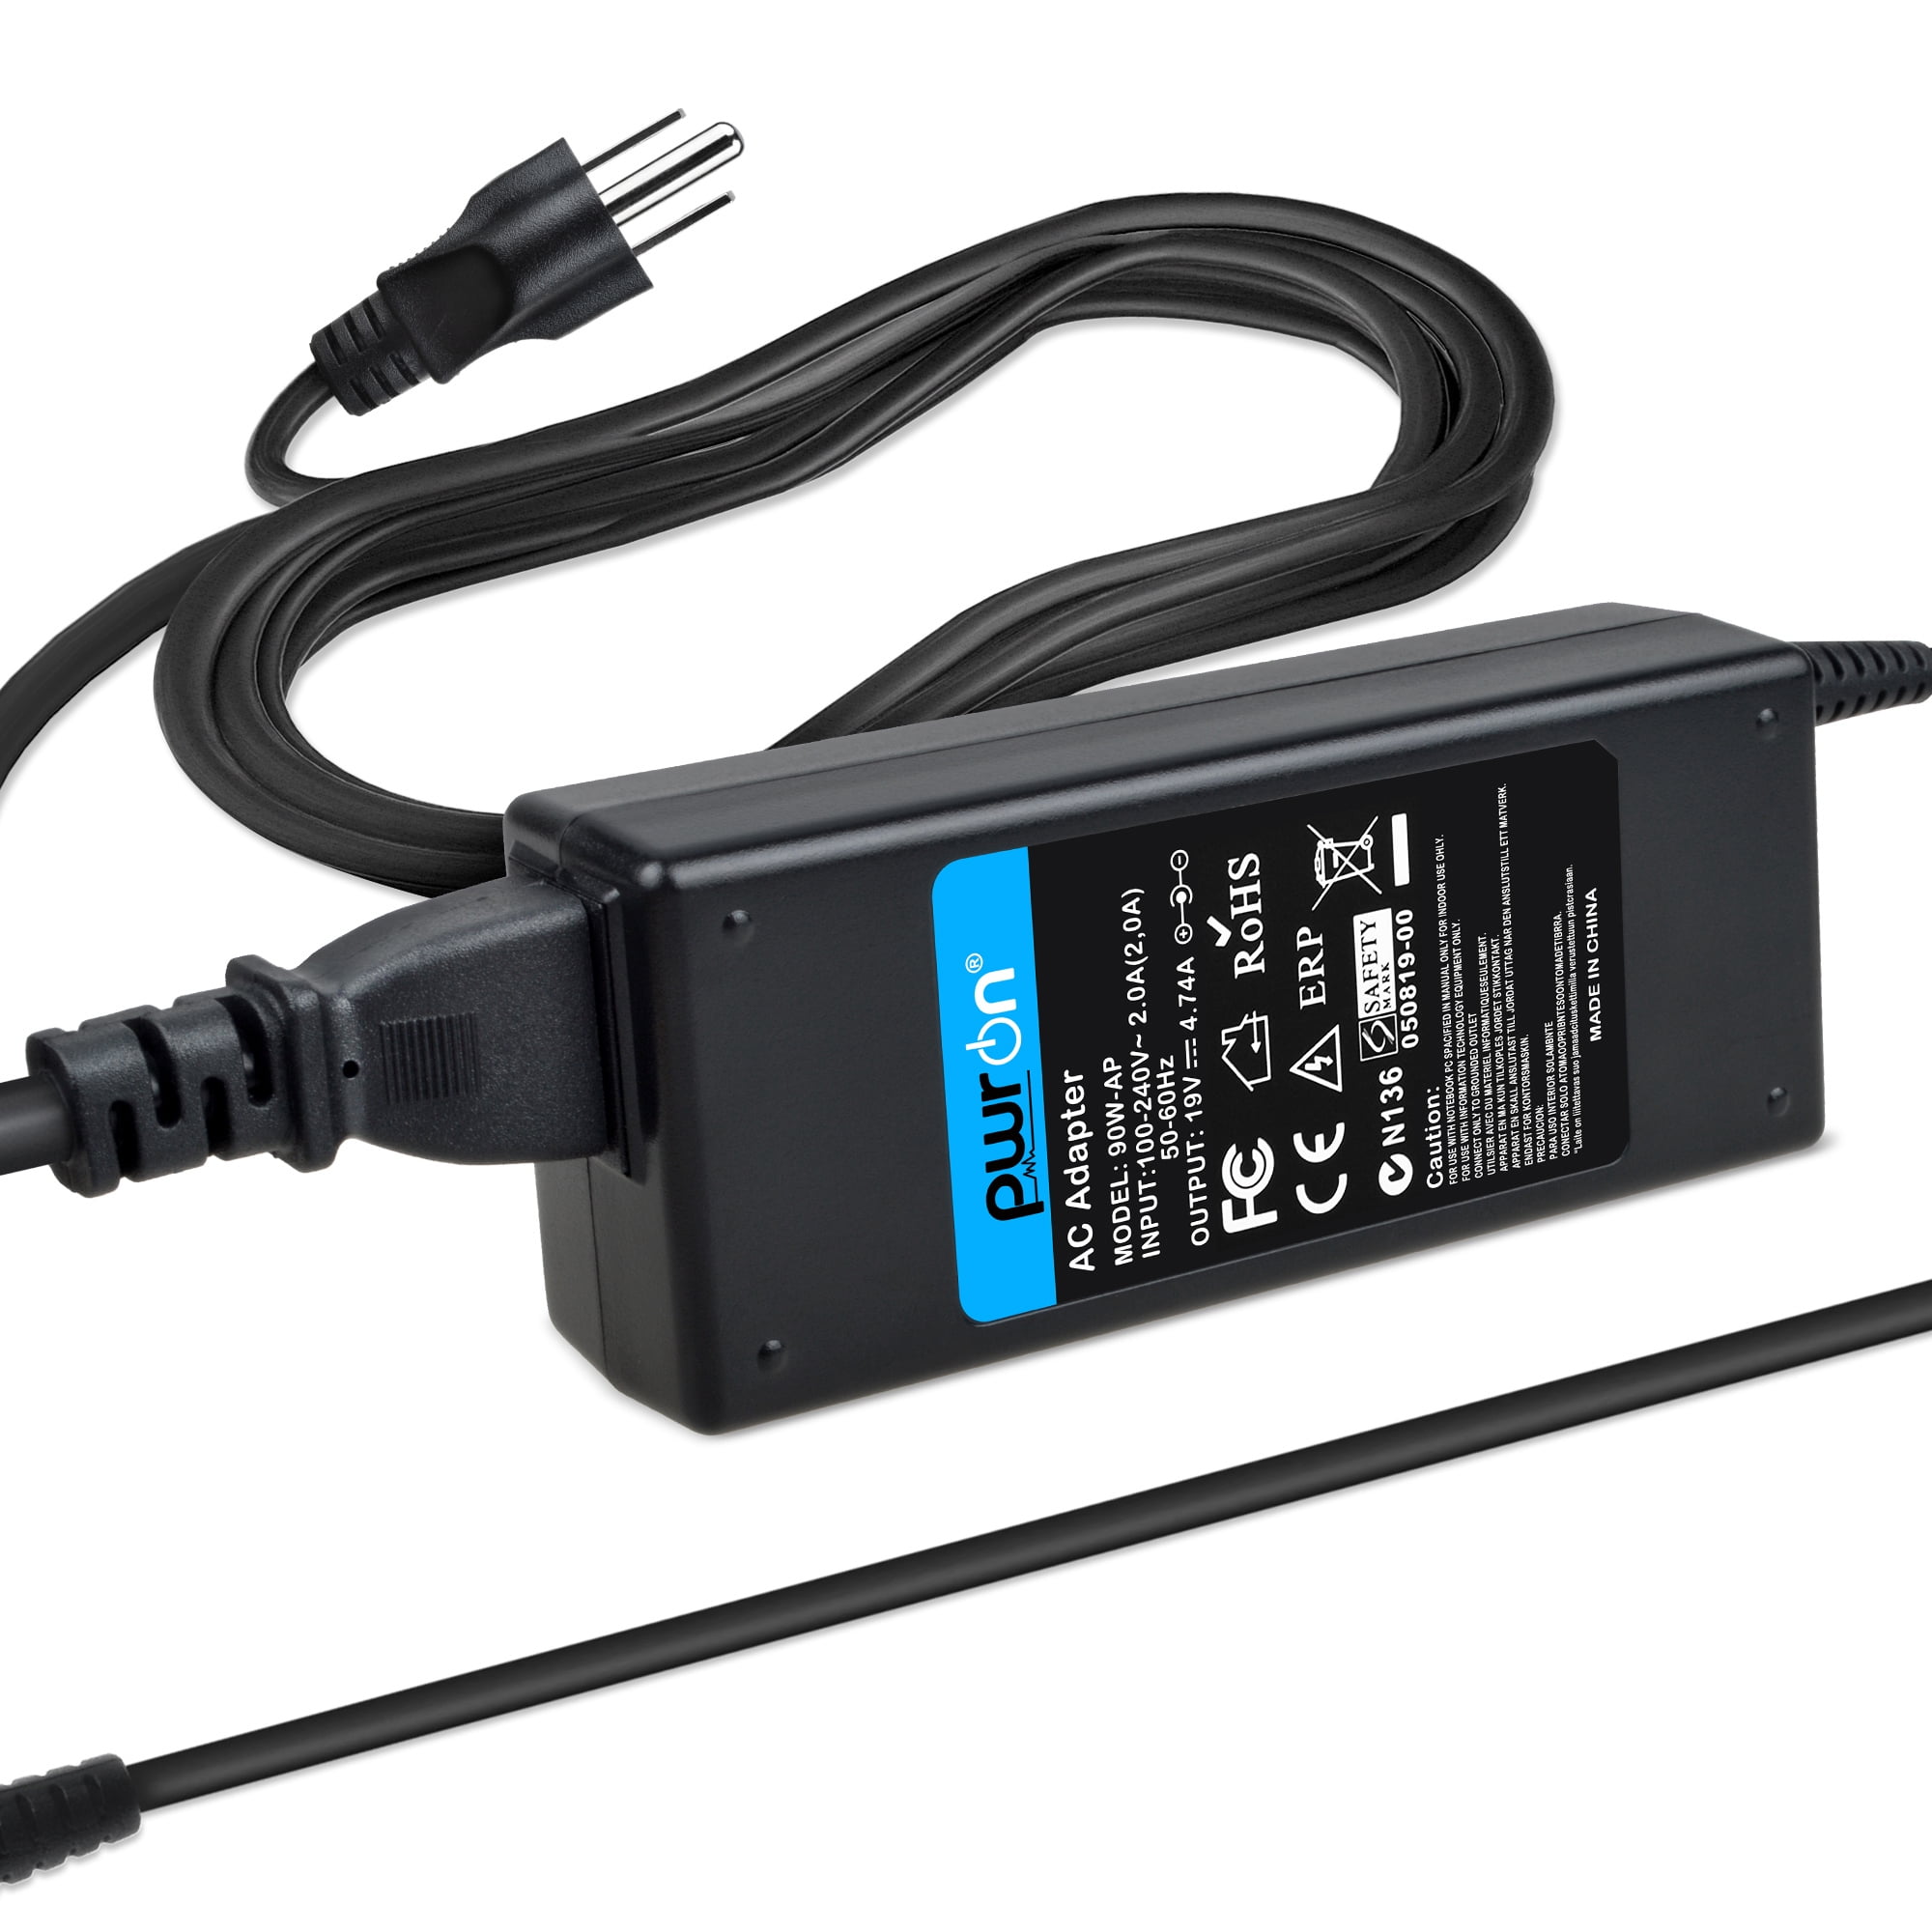 specificere Urimelig katalog PwrON Compatible AC Adapter Charger Replacement for Model: ST-C-090-19000474CT  ST-C-09019000474CT Power Mains - Walmart.com